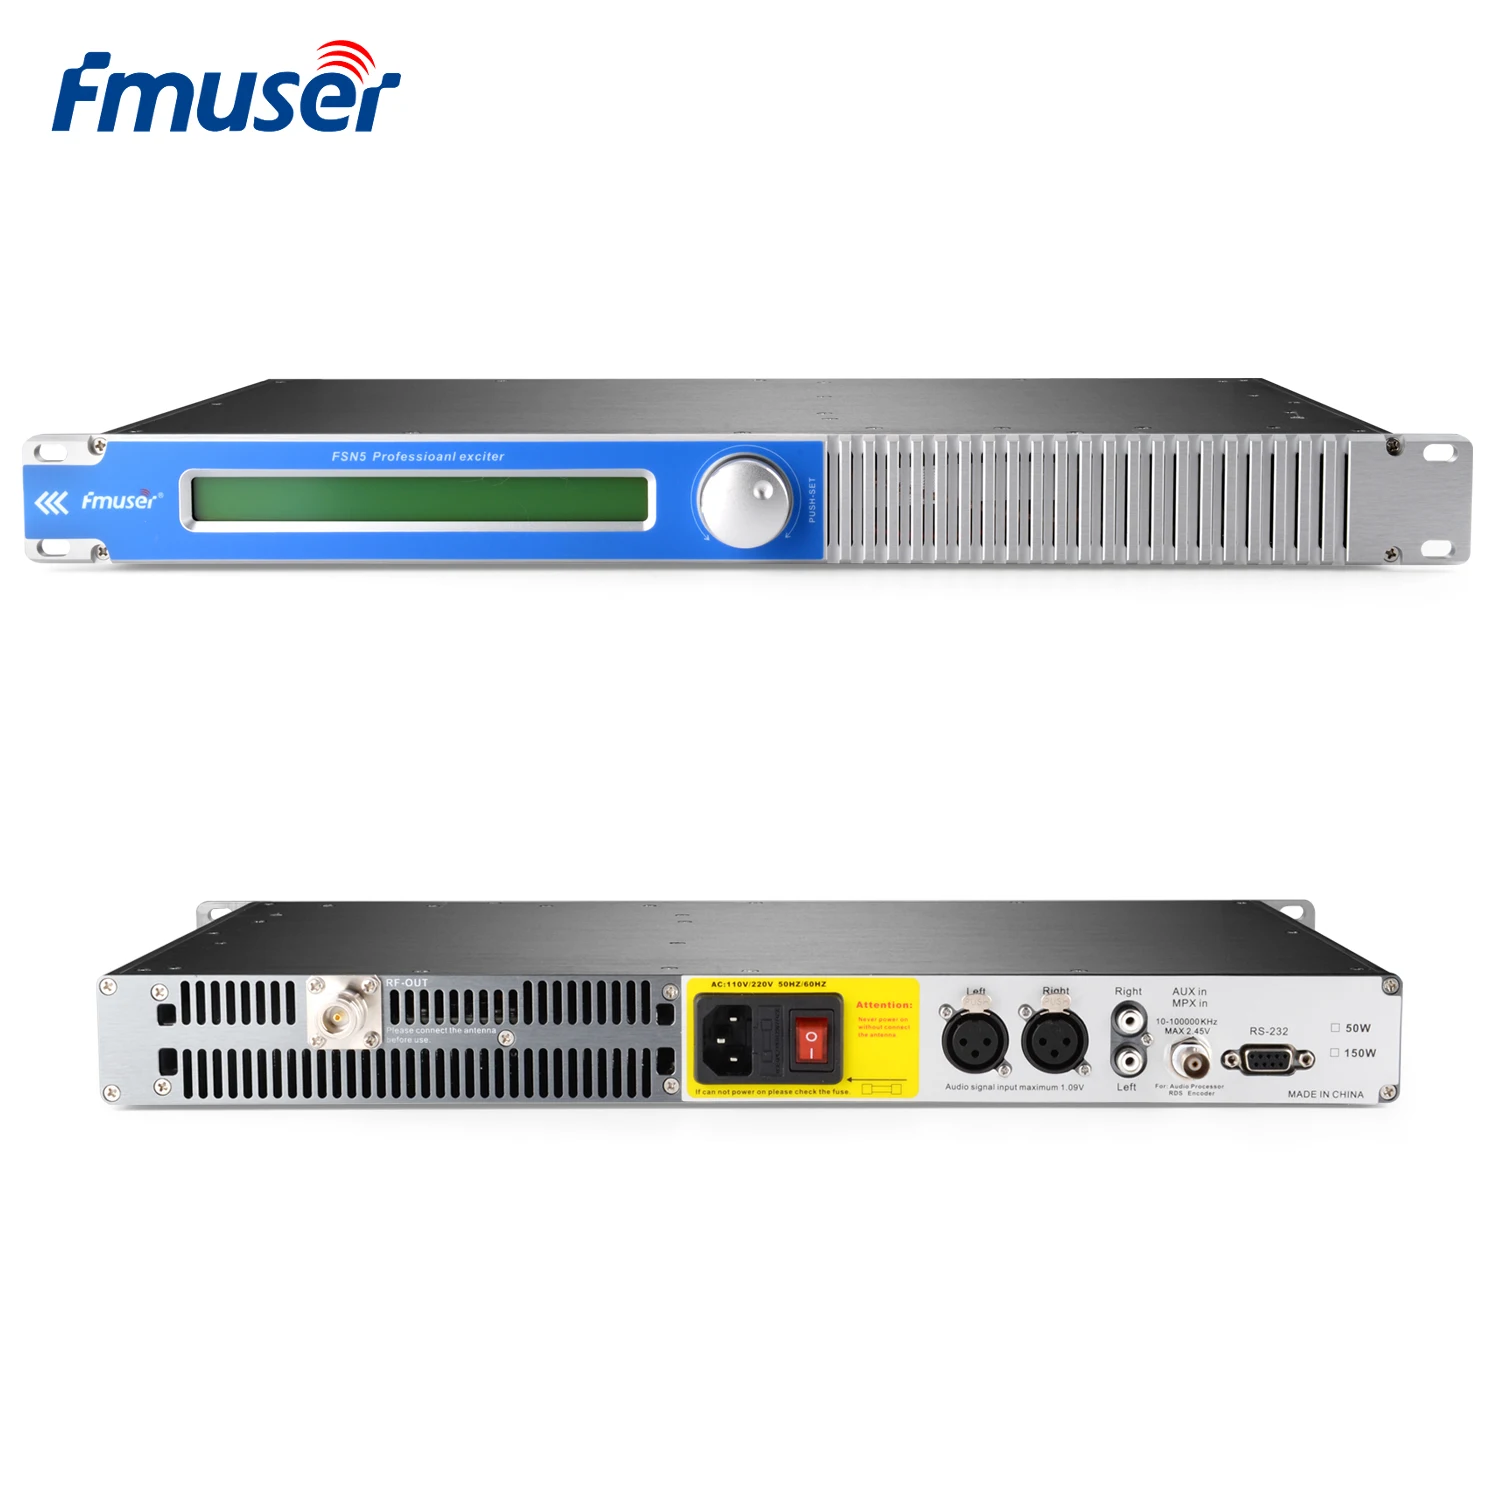 FMUSER NEW 1W FU-X01AK FM Transmitter FM radio broadcaster 50usd/70us  Pre-emphasis 0-1w Power Output Adjustable with Antenna Power Supply Kit